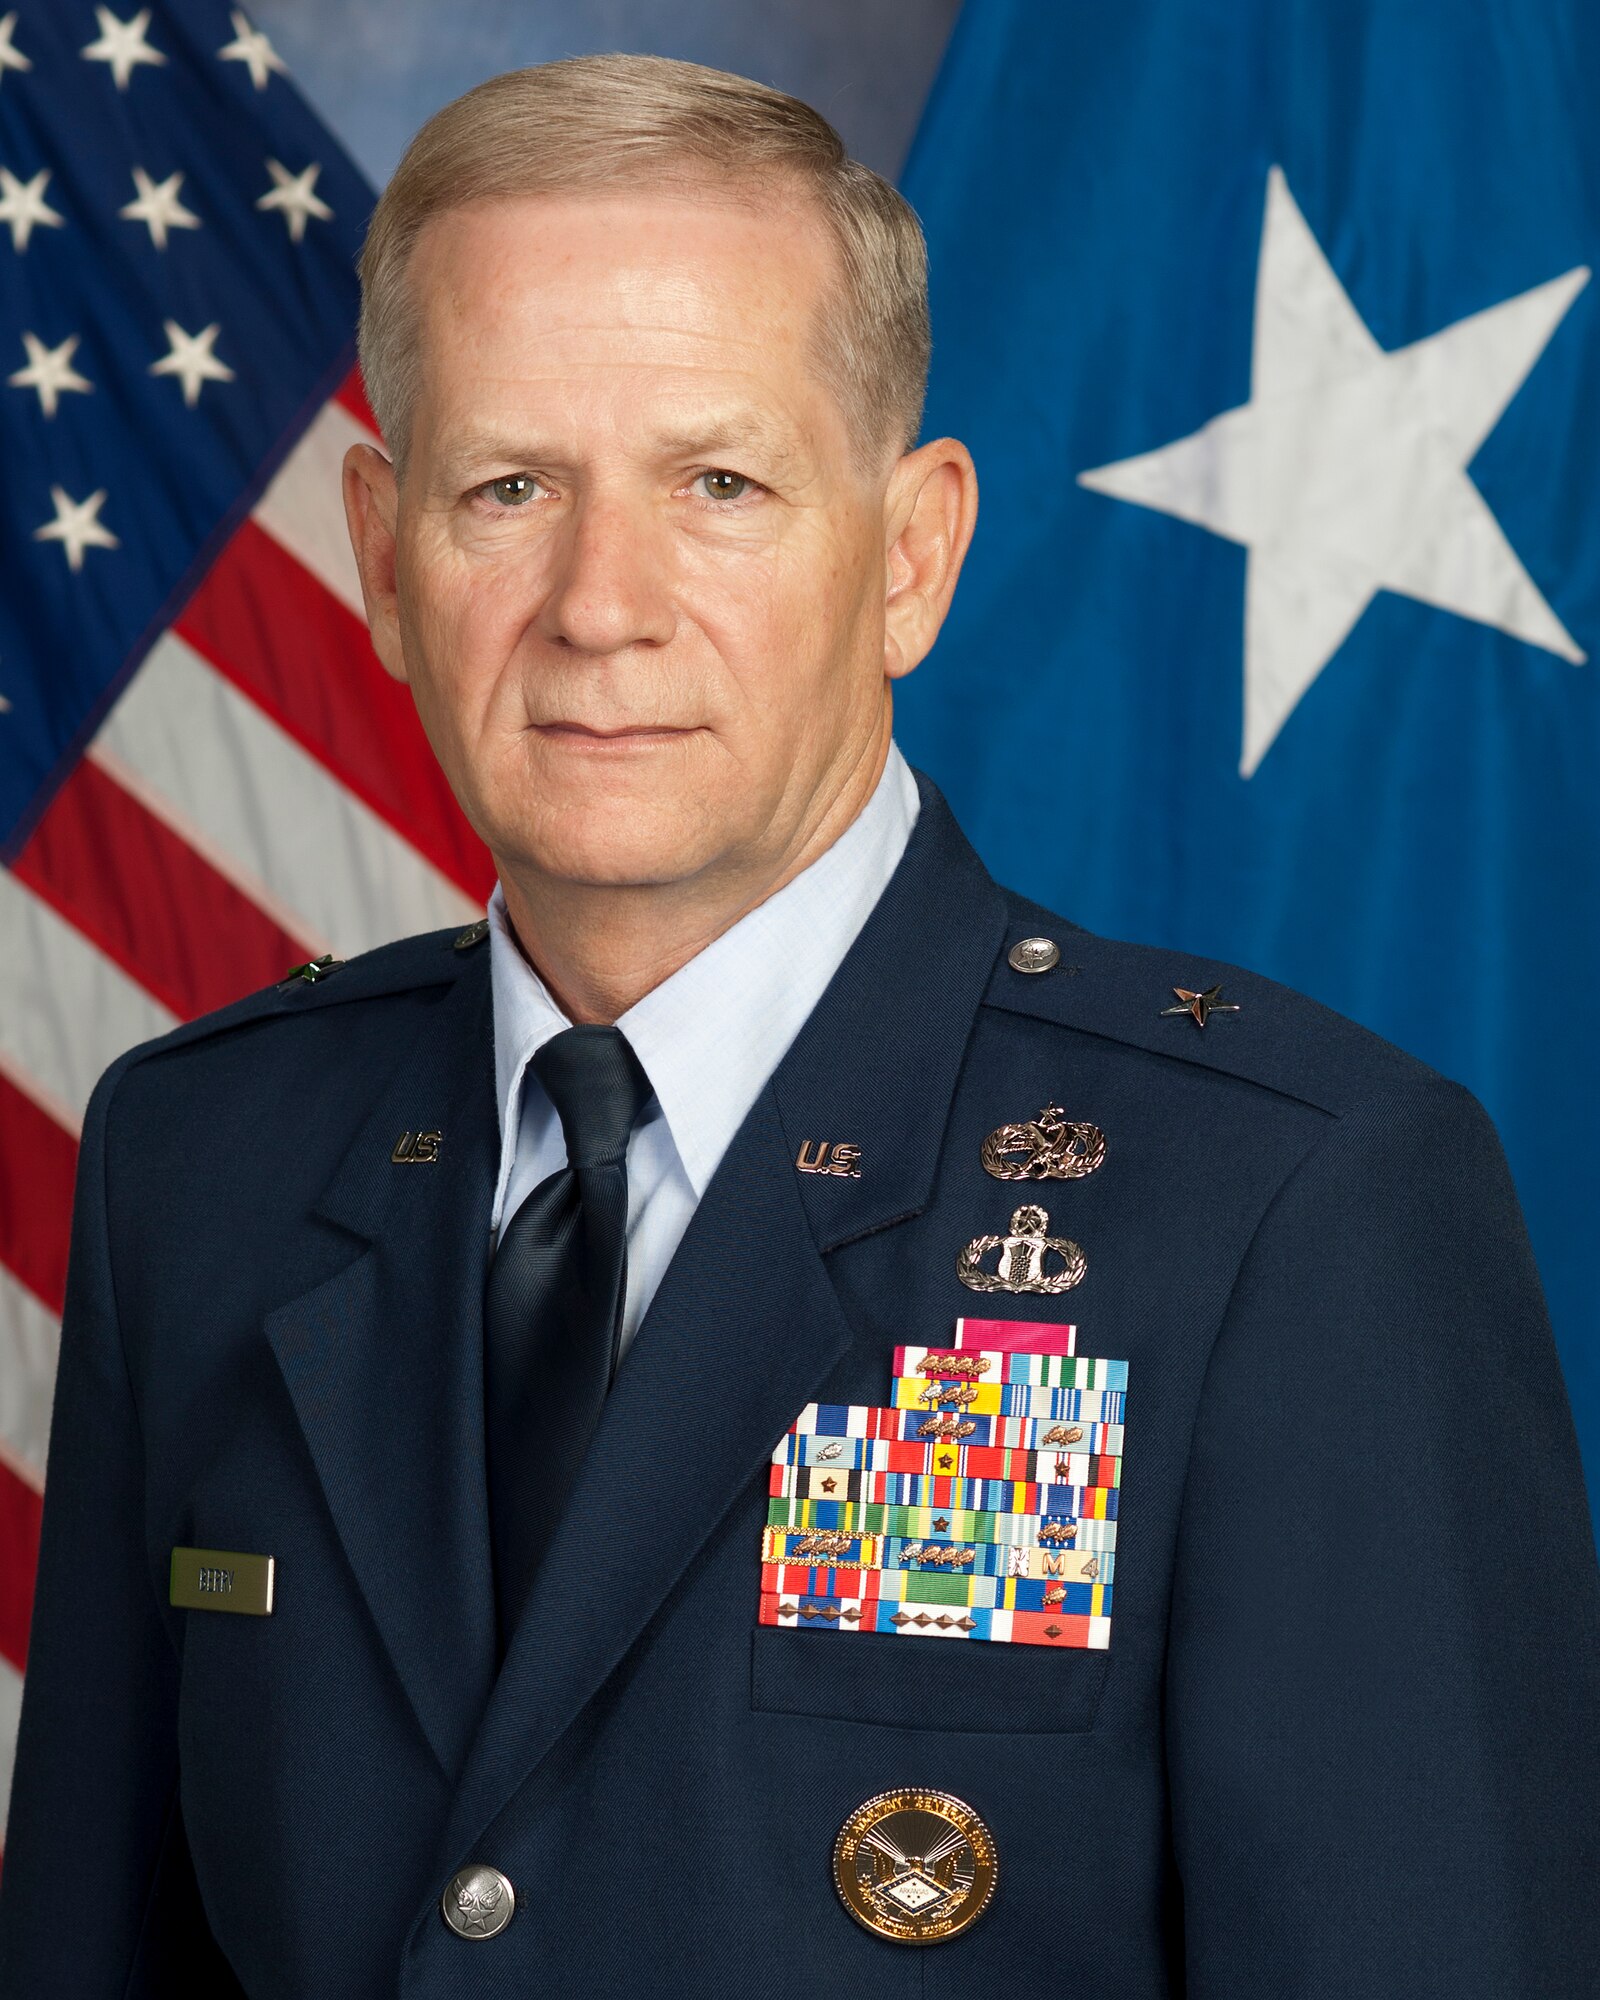 Arkansas governor-elect Asa Hutchinson announced Dec. 17 that Brig. Gen. Mark Berry, former 188th Maintenance Group commander and current Arkansas Air National Guard chief of staff, will be the Arkansas National Guard’s next adjutant general. (Photo by Arkansas National Guard Public Affairs)